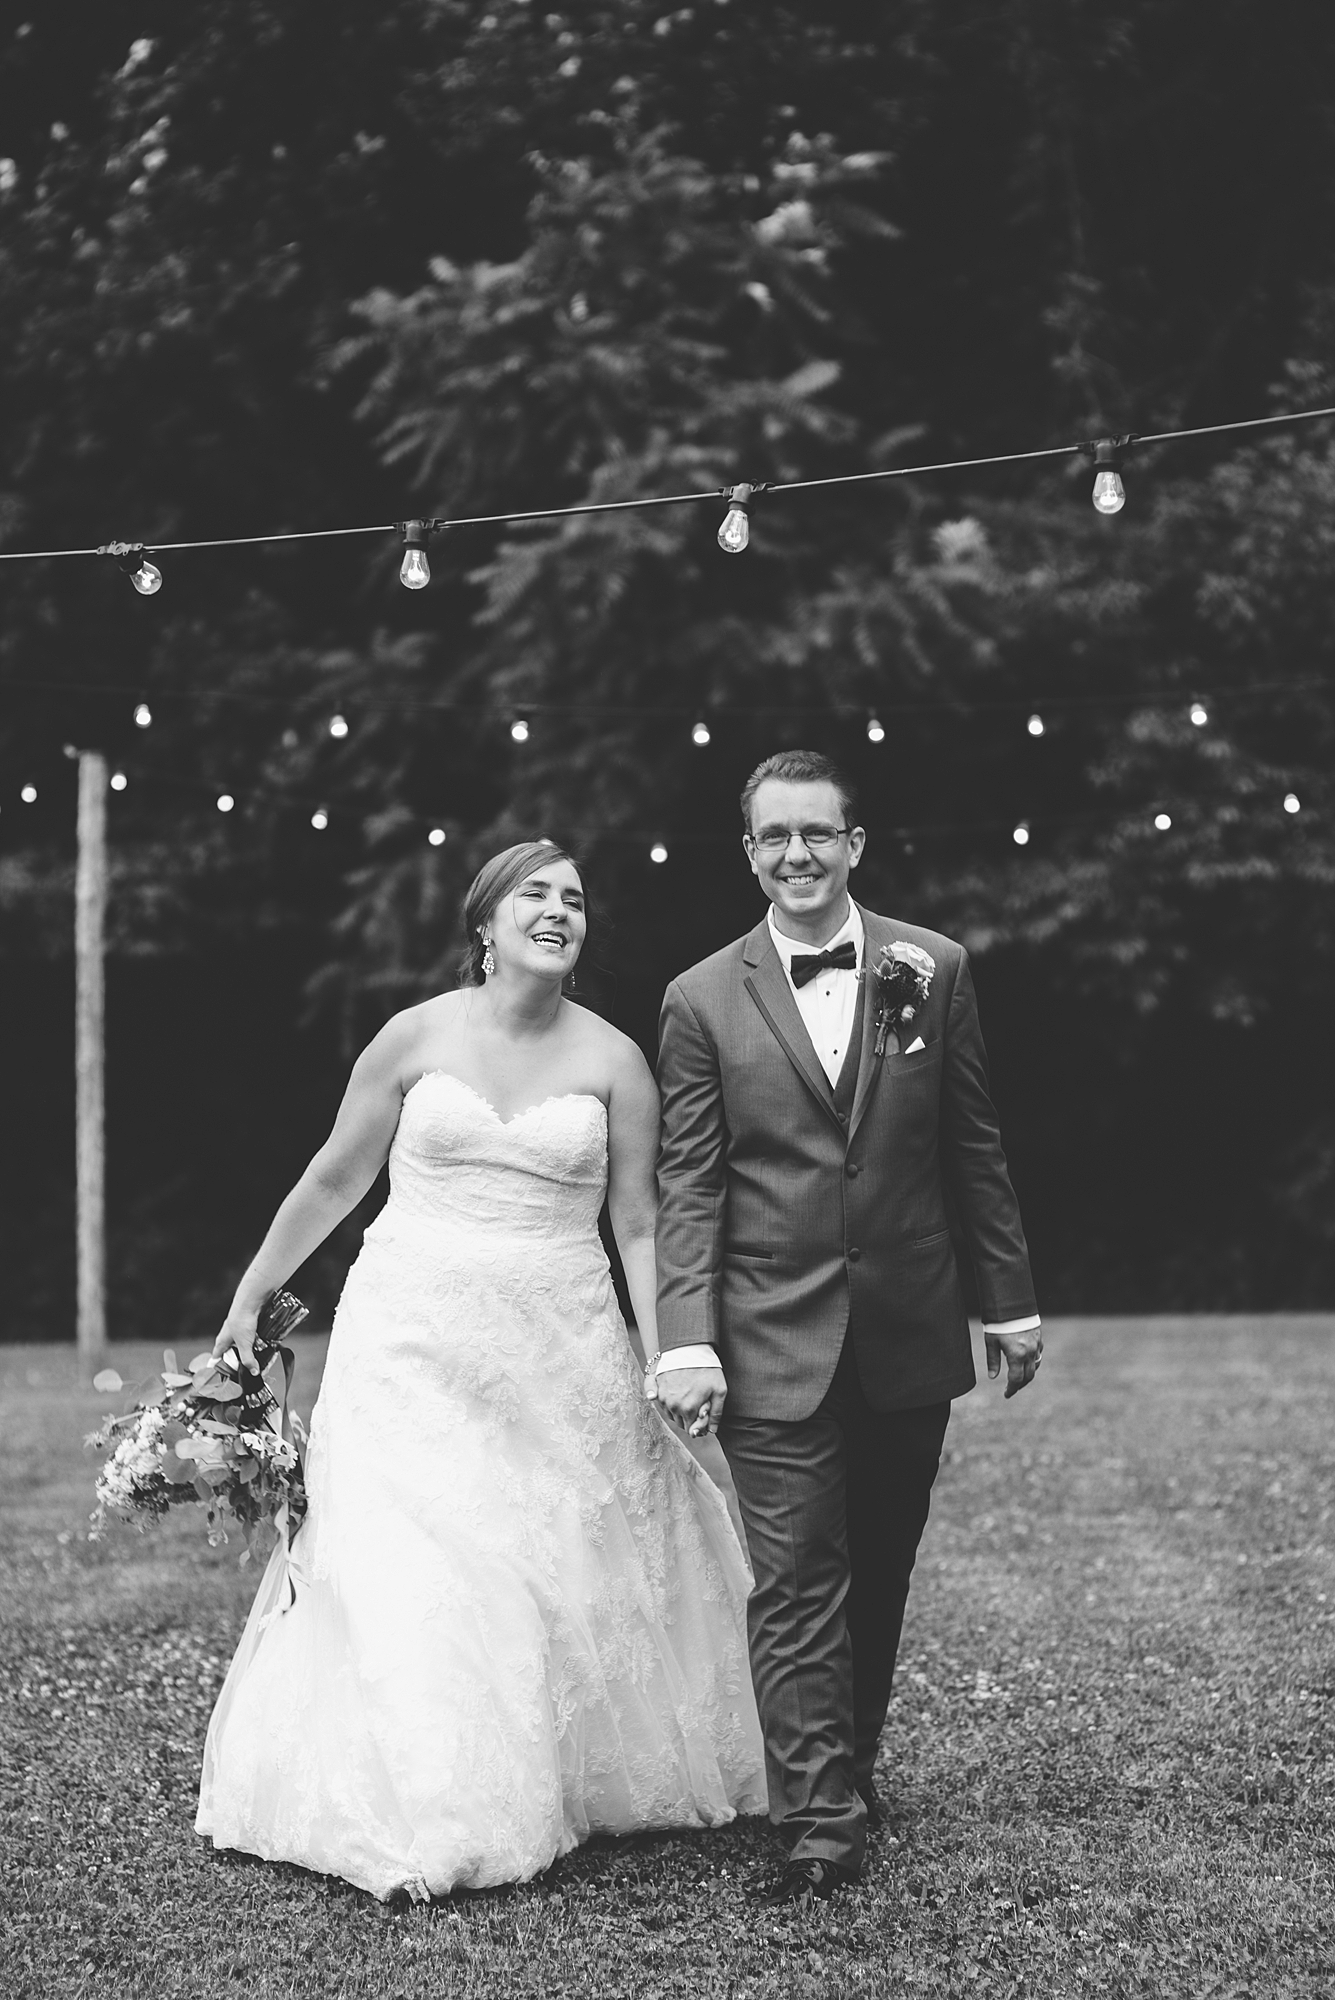 A black and white portrait of a bride and groom walking towards the camera for their summer wedding at Hidden Creek farm weddings by Dolly DeLong PHotography